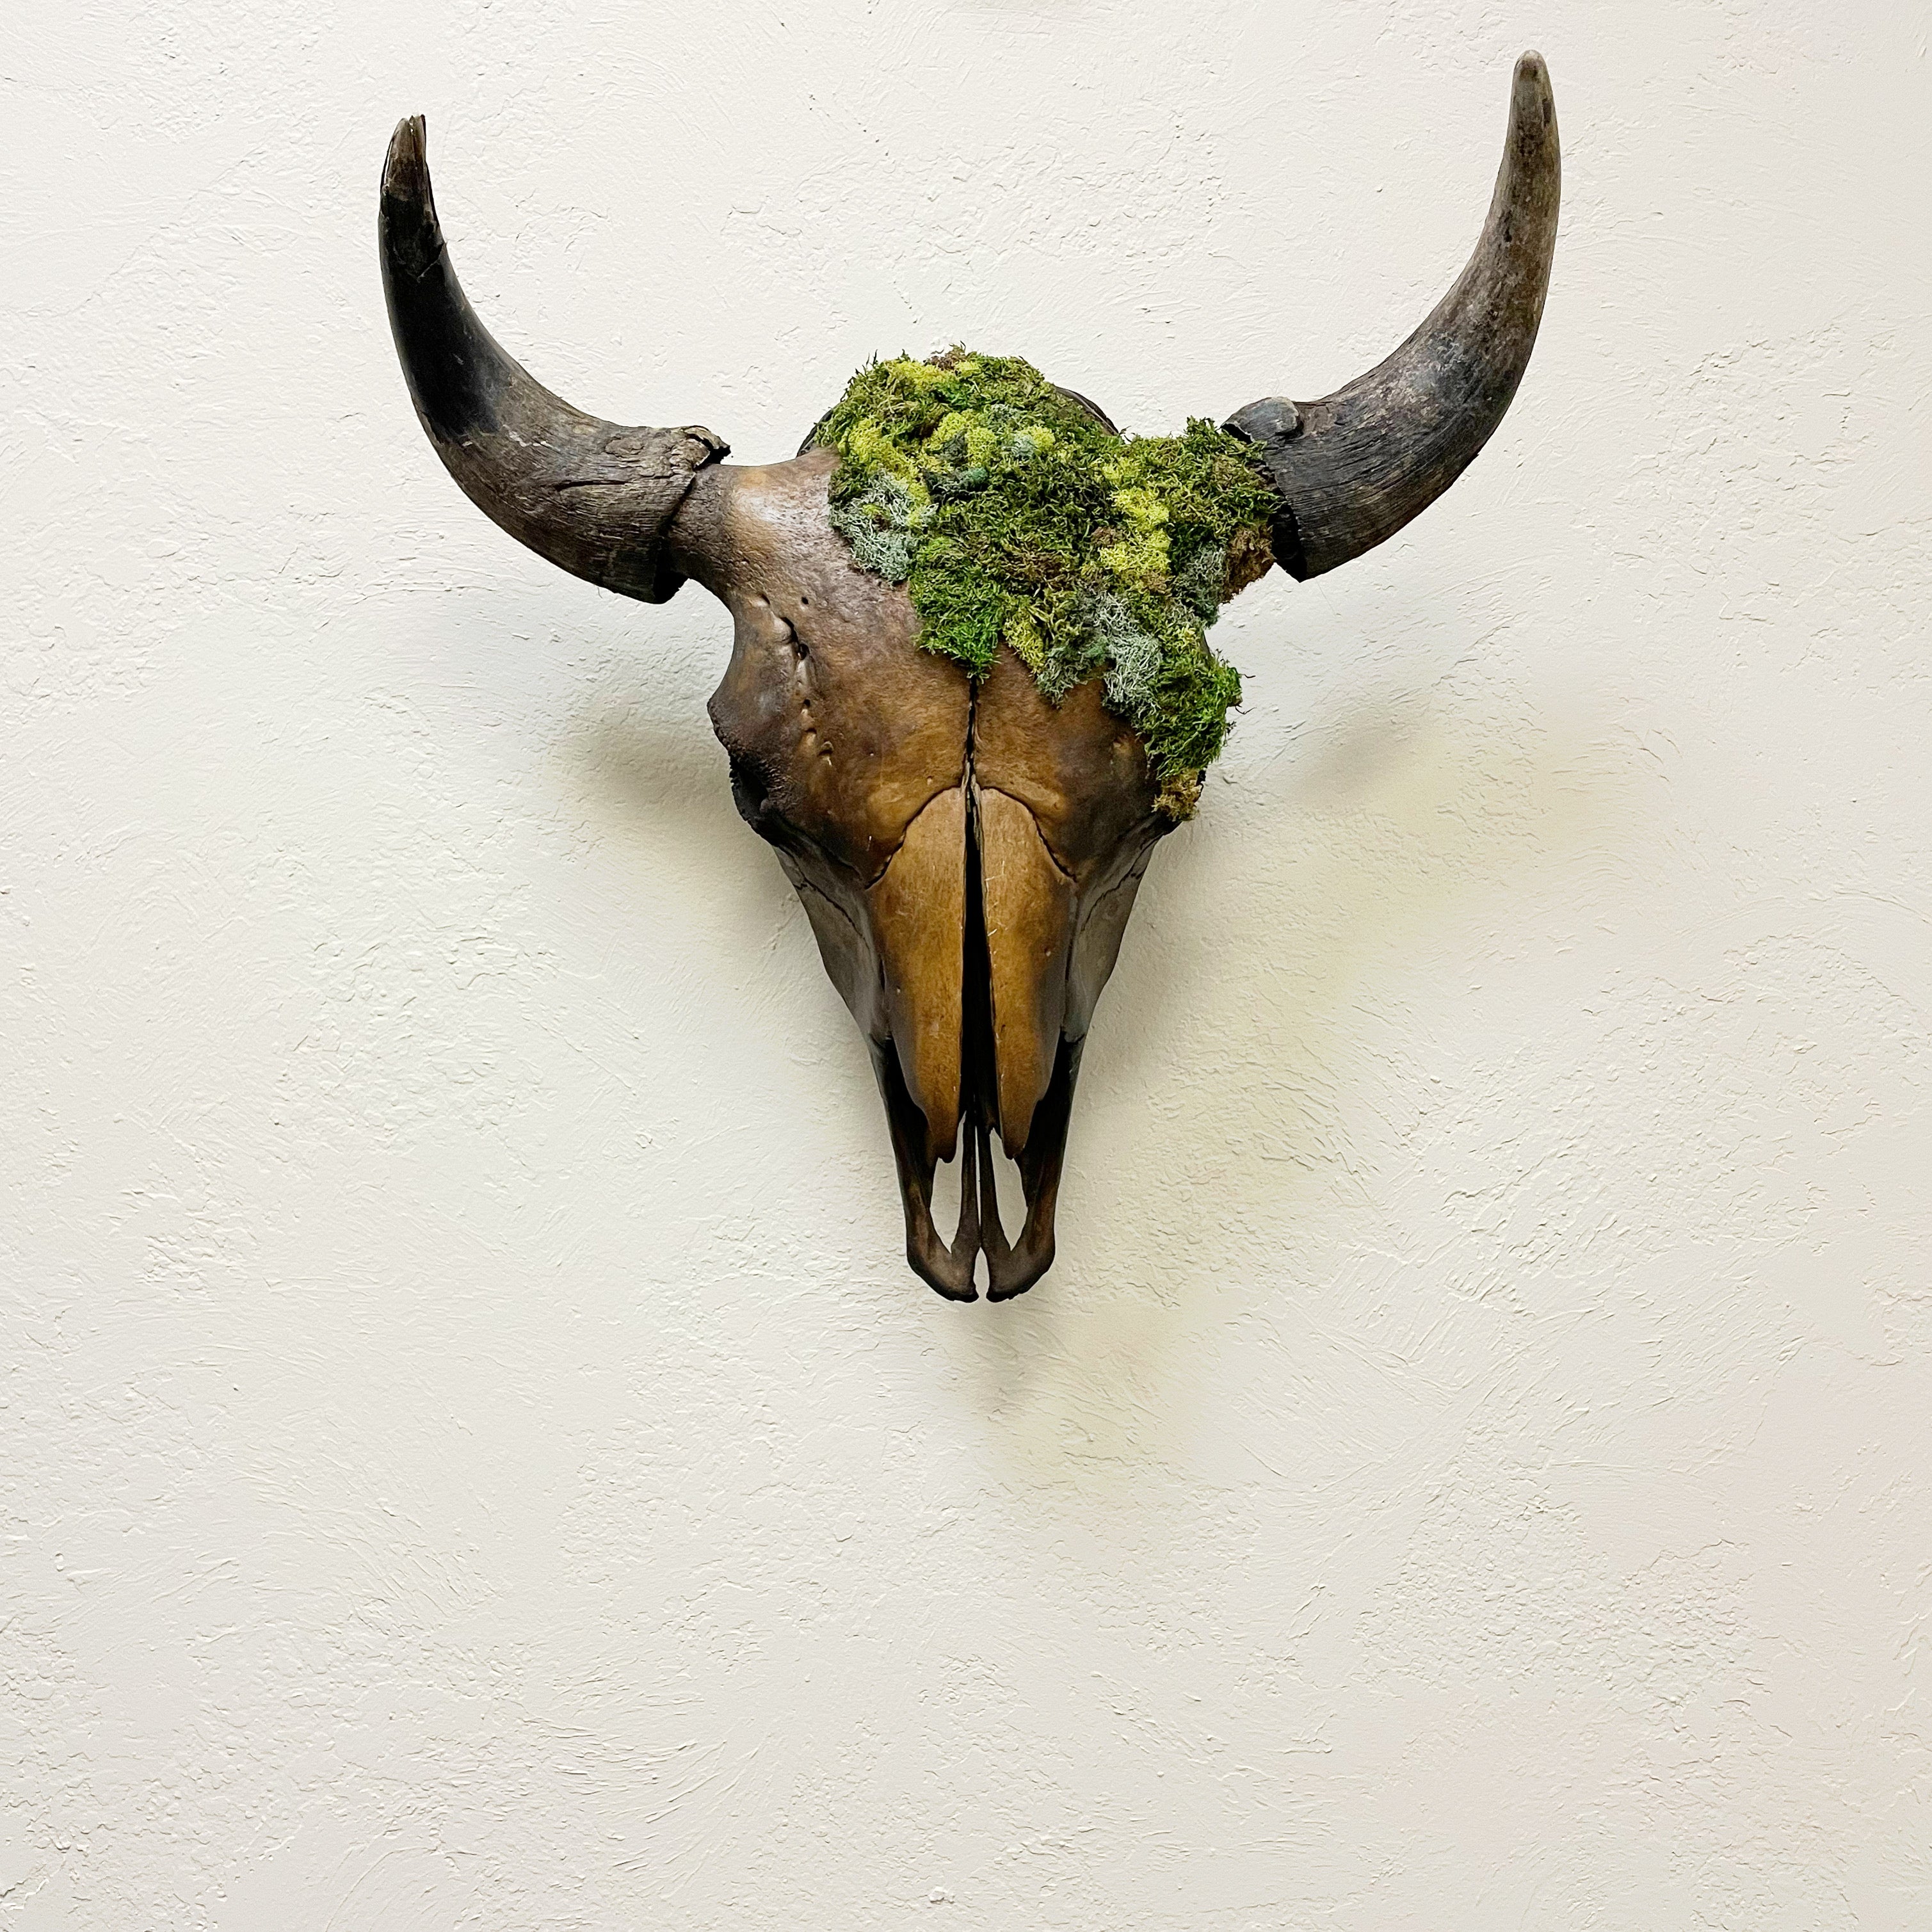 The "Moss Bison"